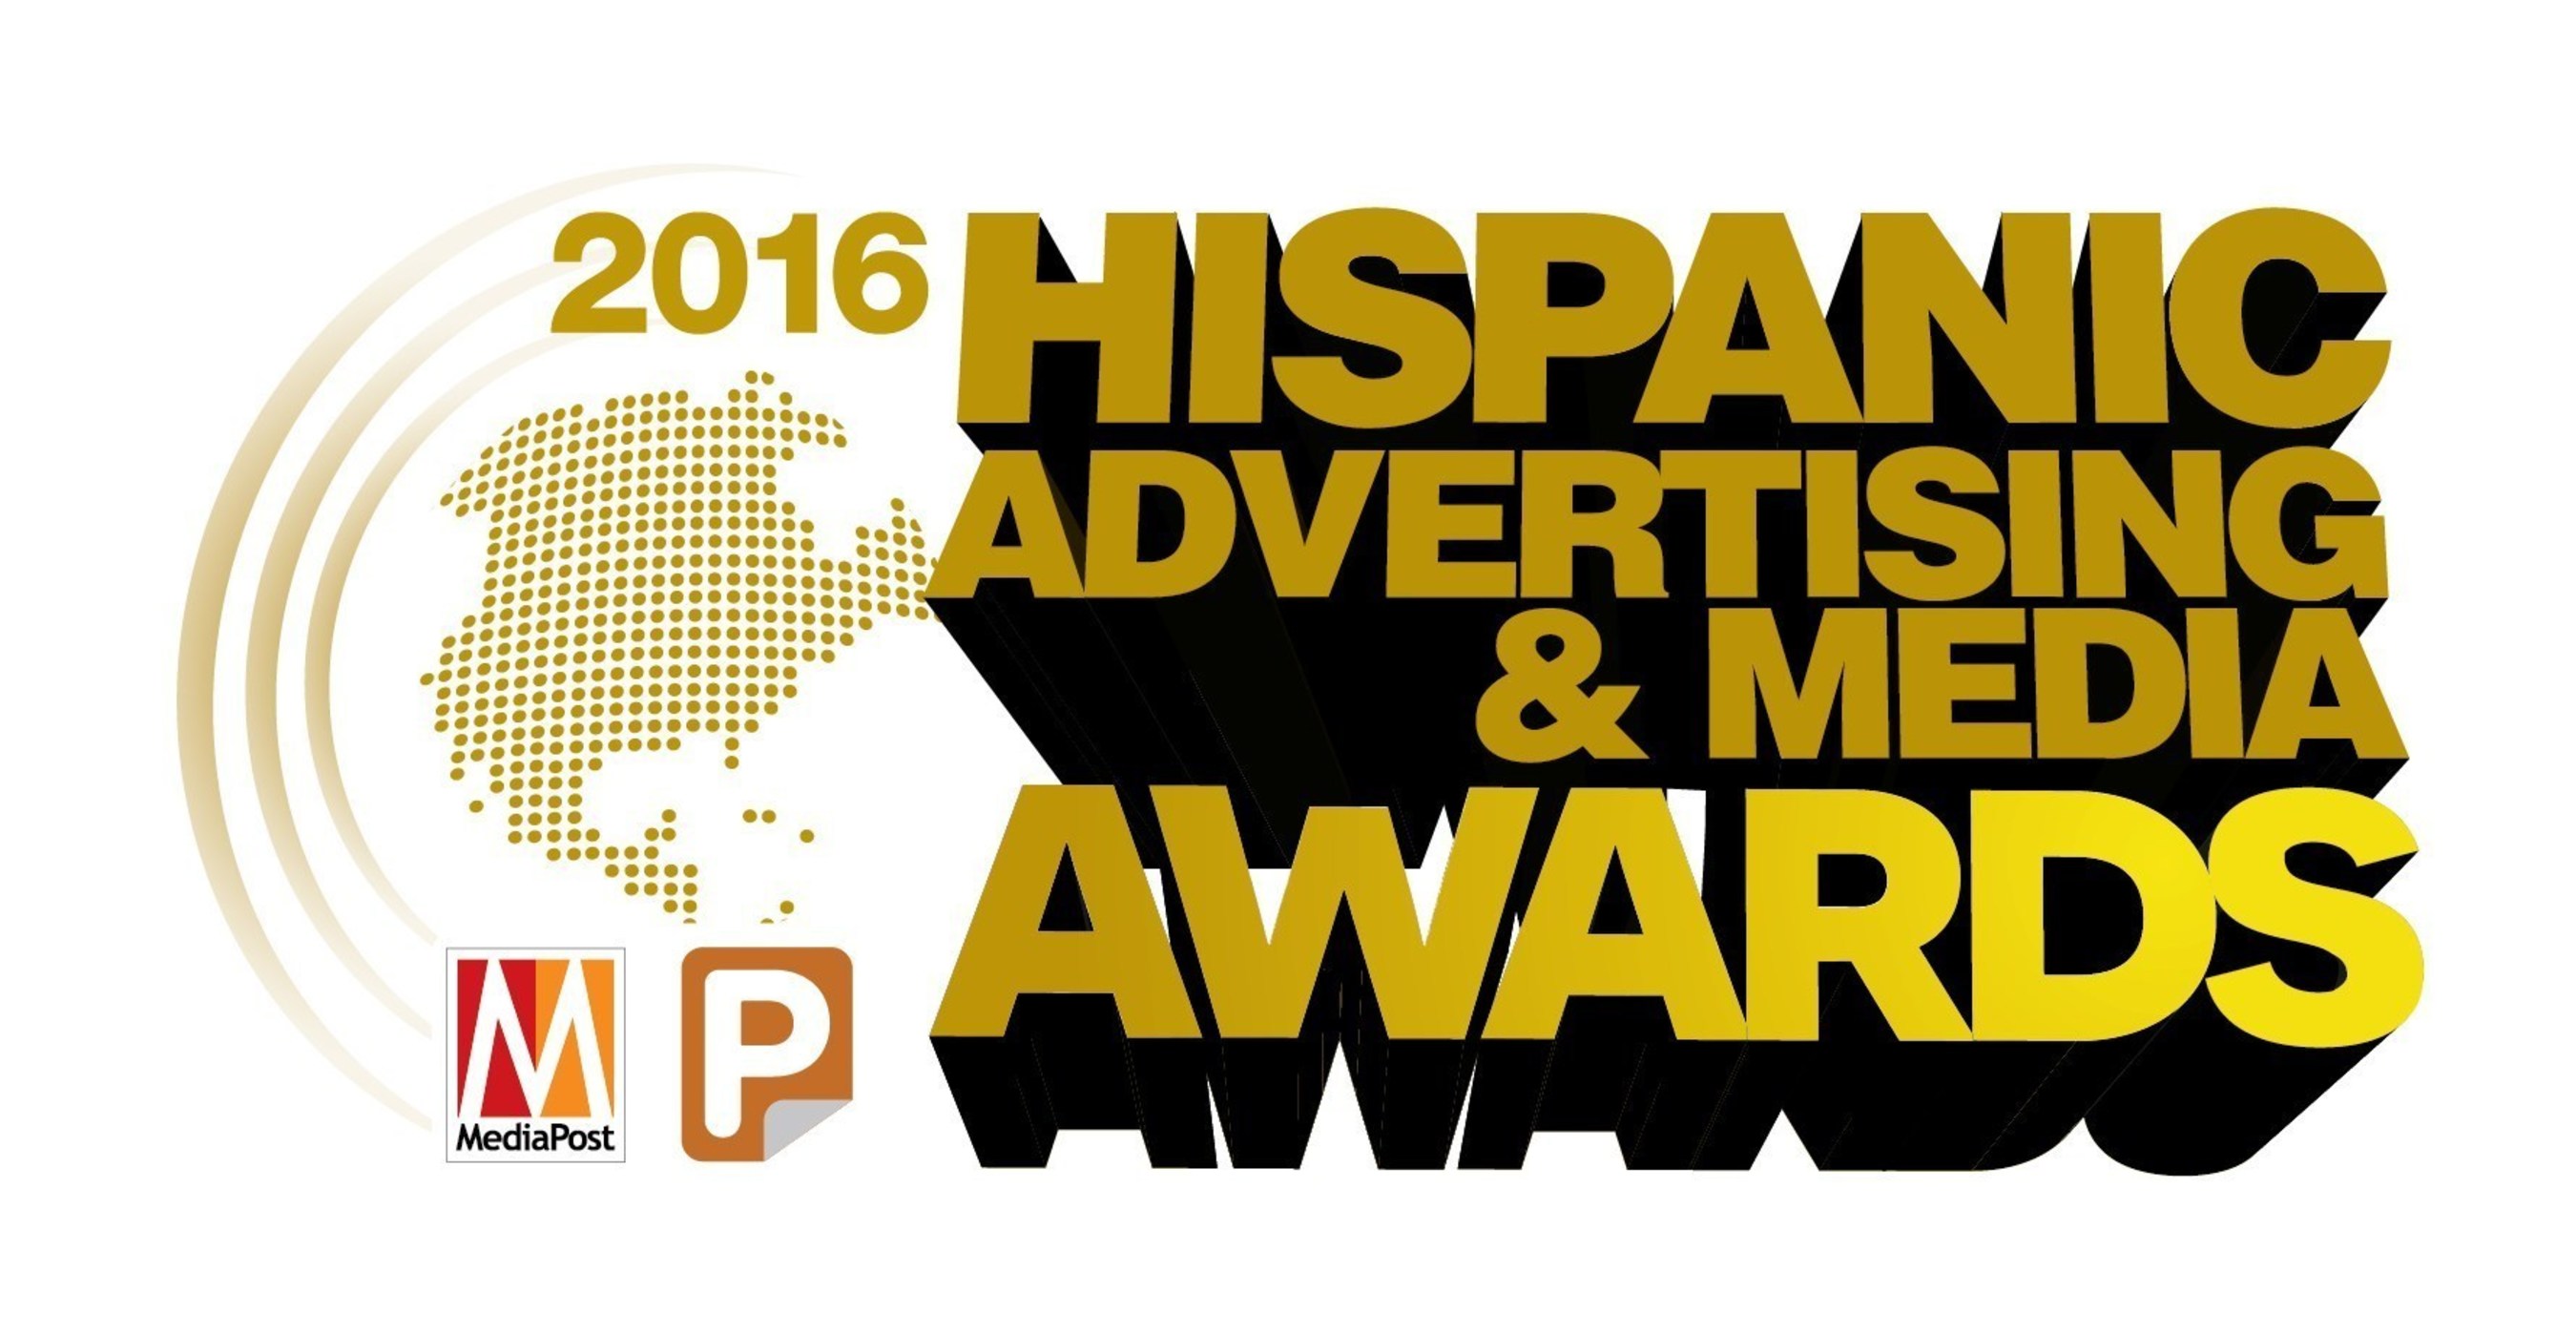 More than 60 nominees in 12 categories are competing to win the awards. Marketing, Media and Tech professionals nationwide are voting until August 31 for #Portada16 marketing, media and tech innovation awards. Vote for your favorite candidates below: https://www.portada-online.com/events/hispanic-conference/#Awards